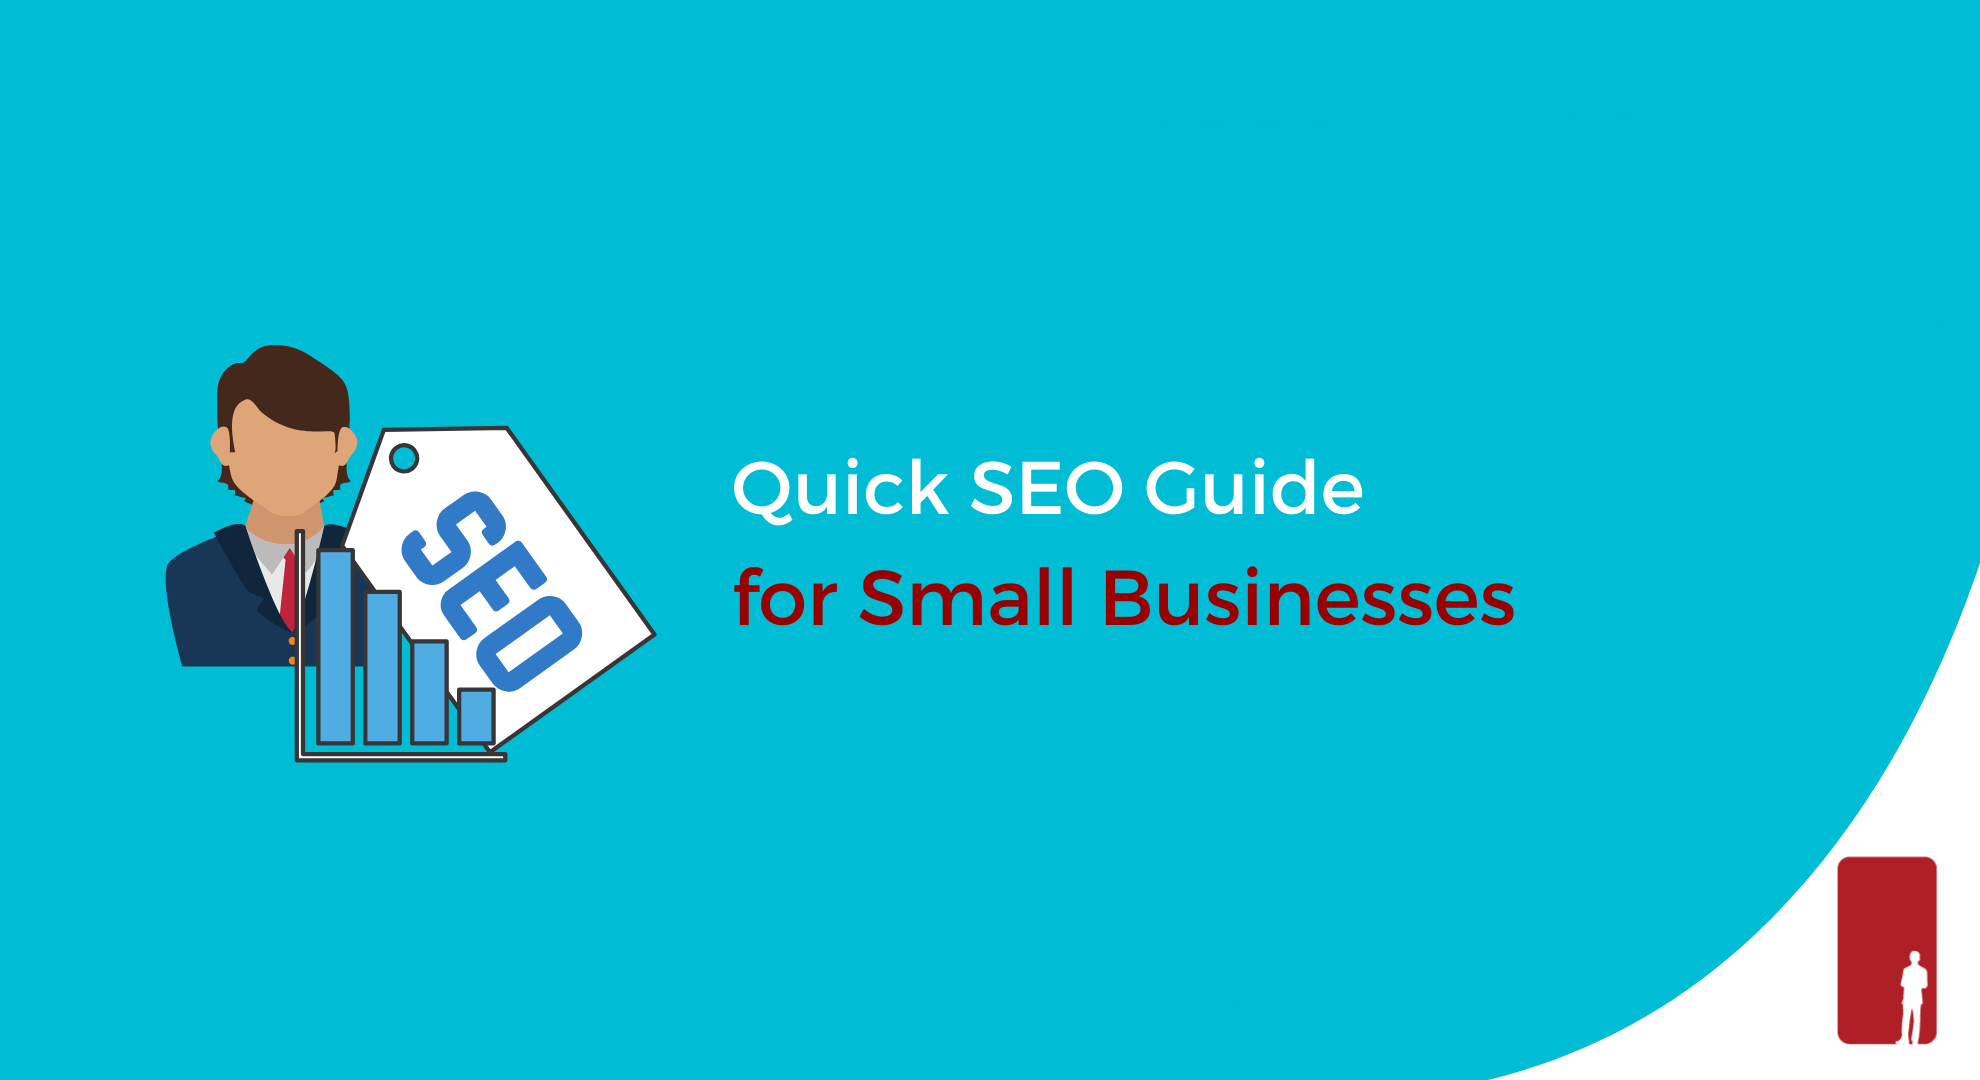 Quick SEO Guide for Small Businesses